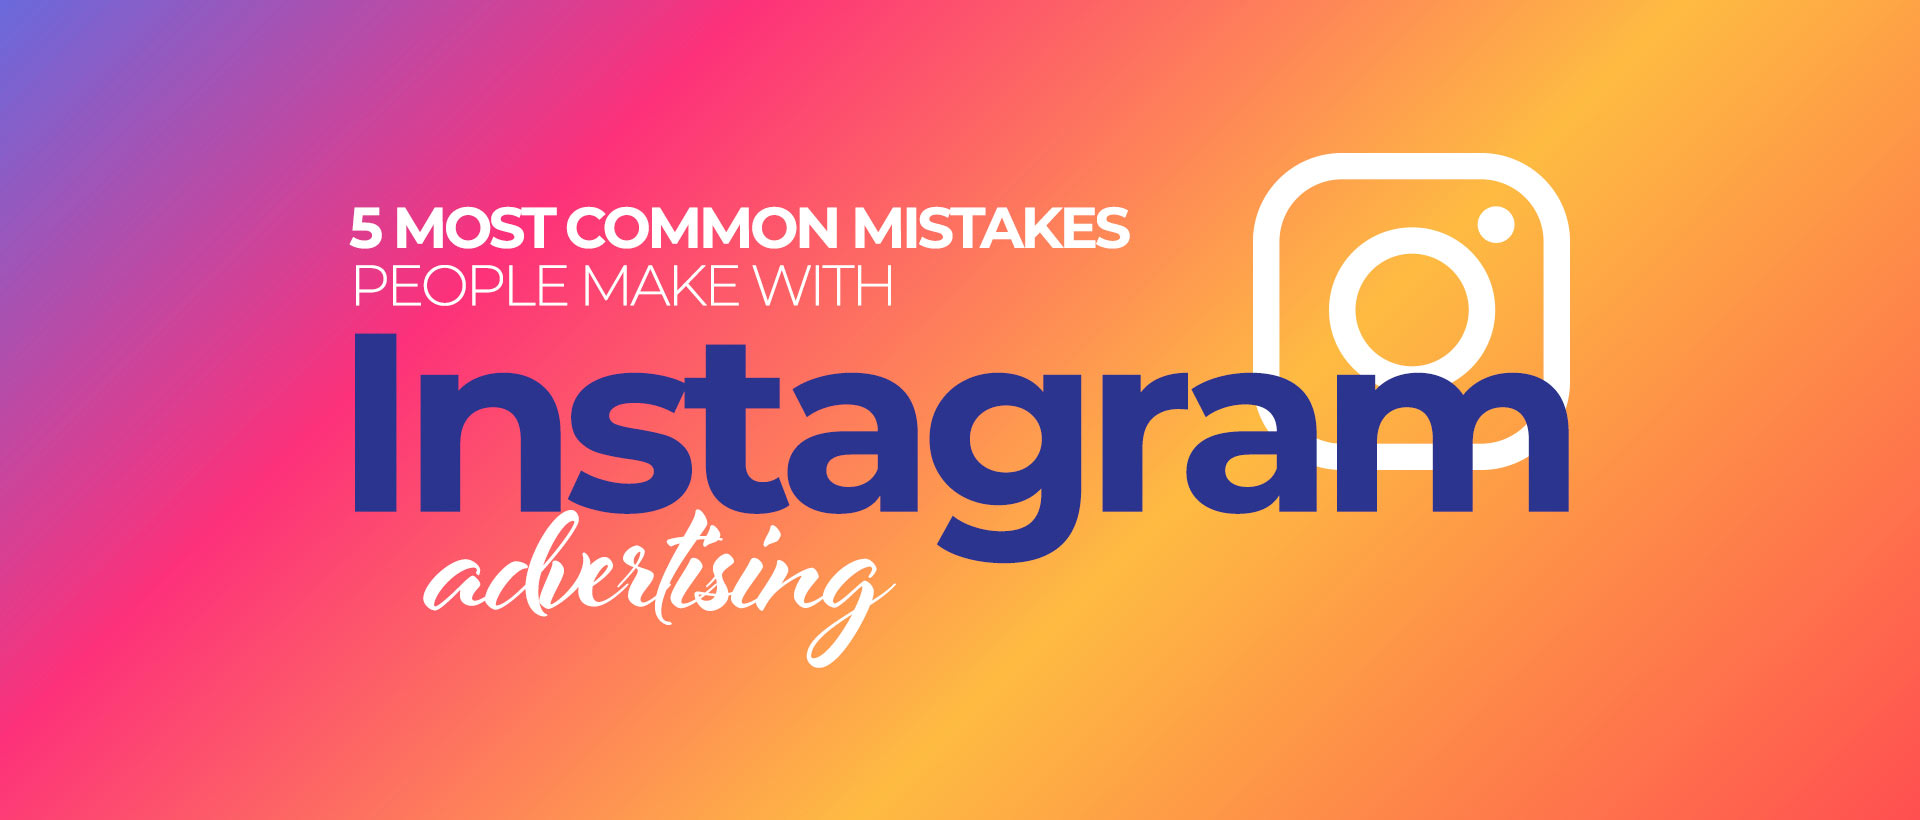 5 Most Common Mistakes People Make With Instagram Advertising